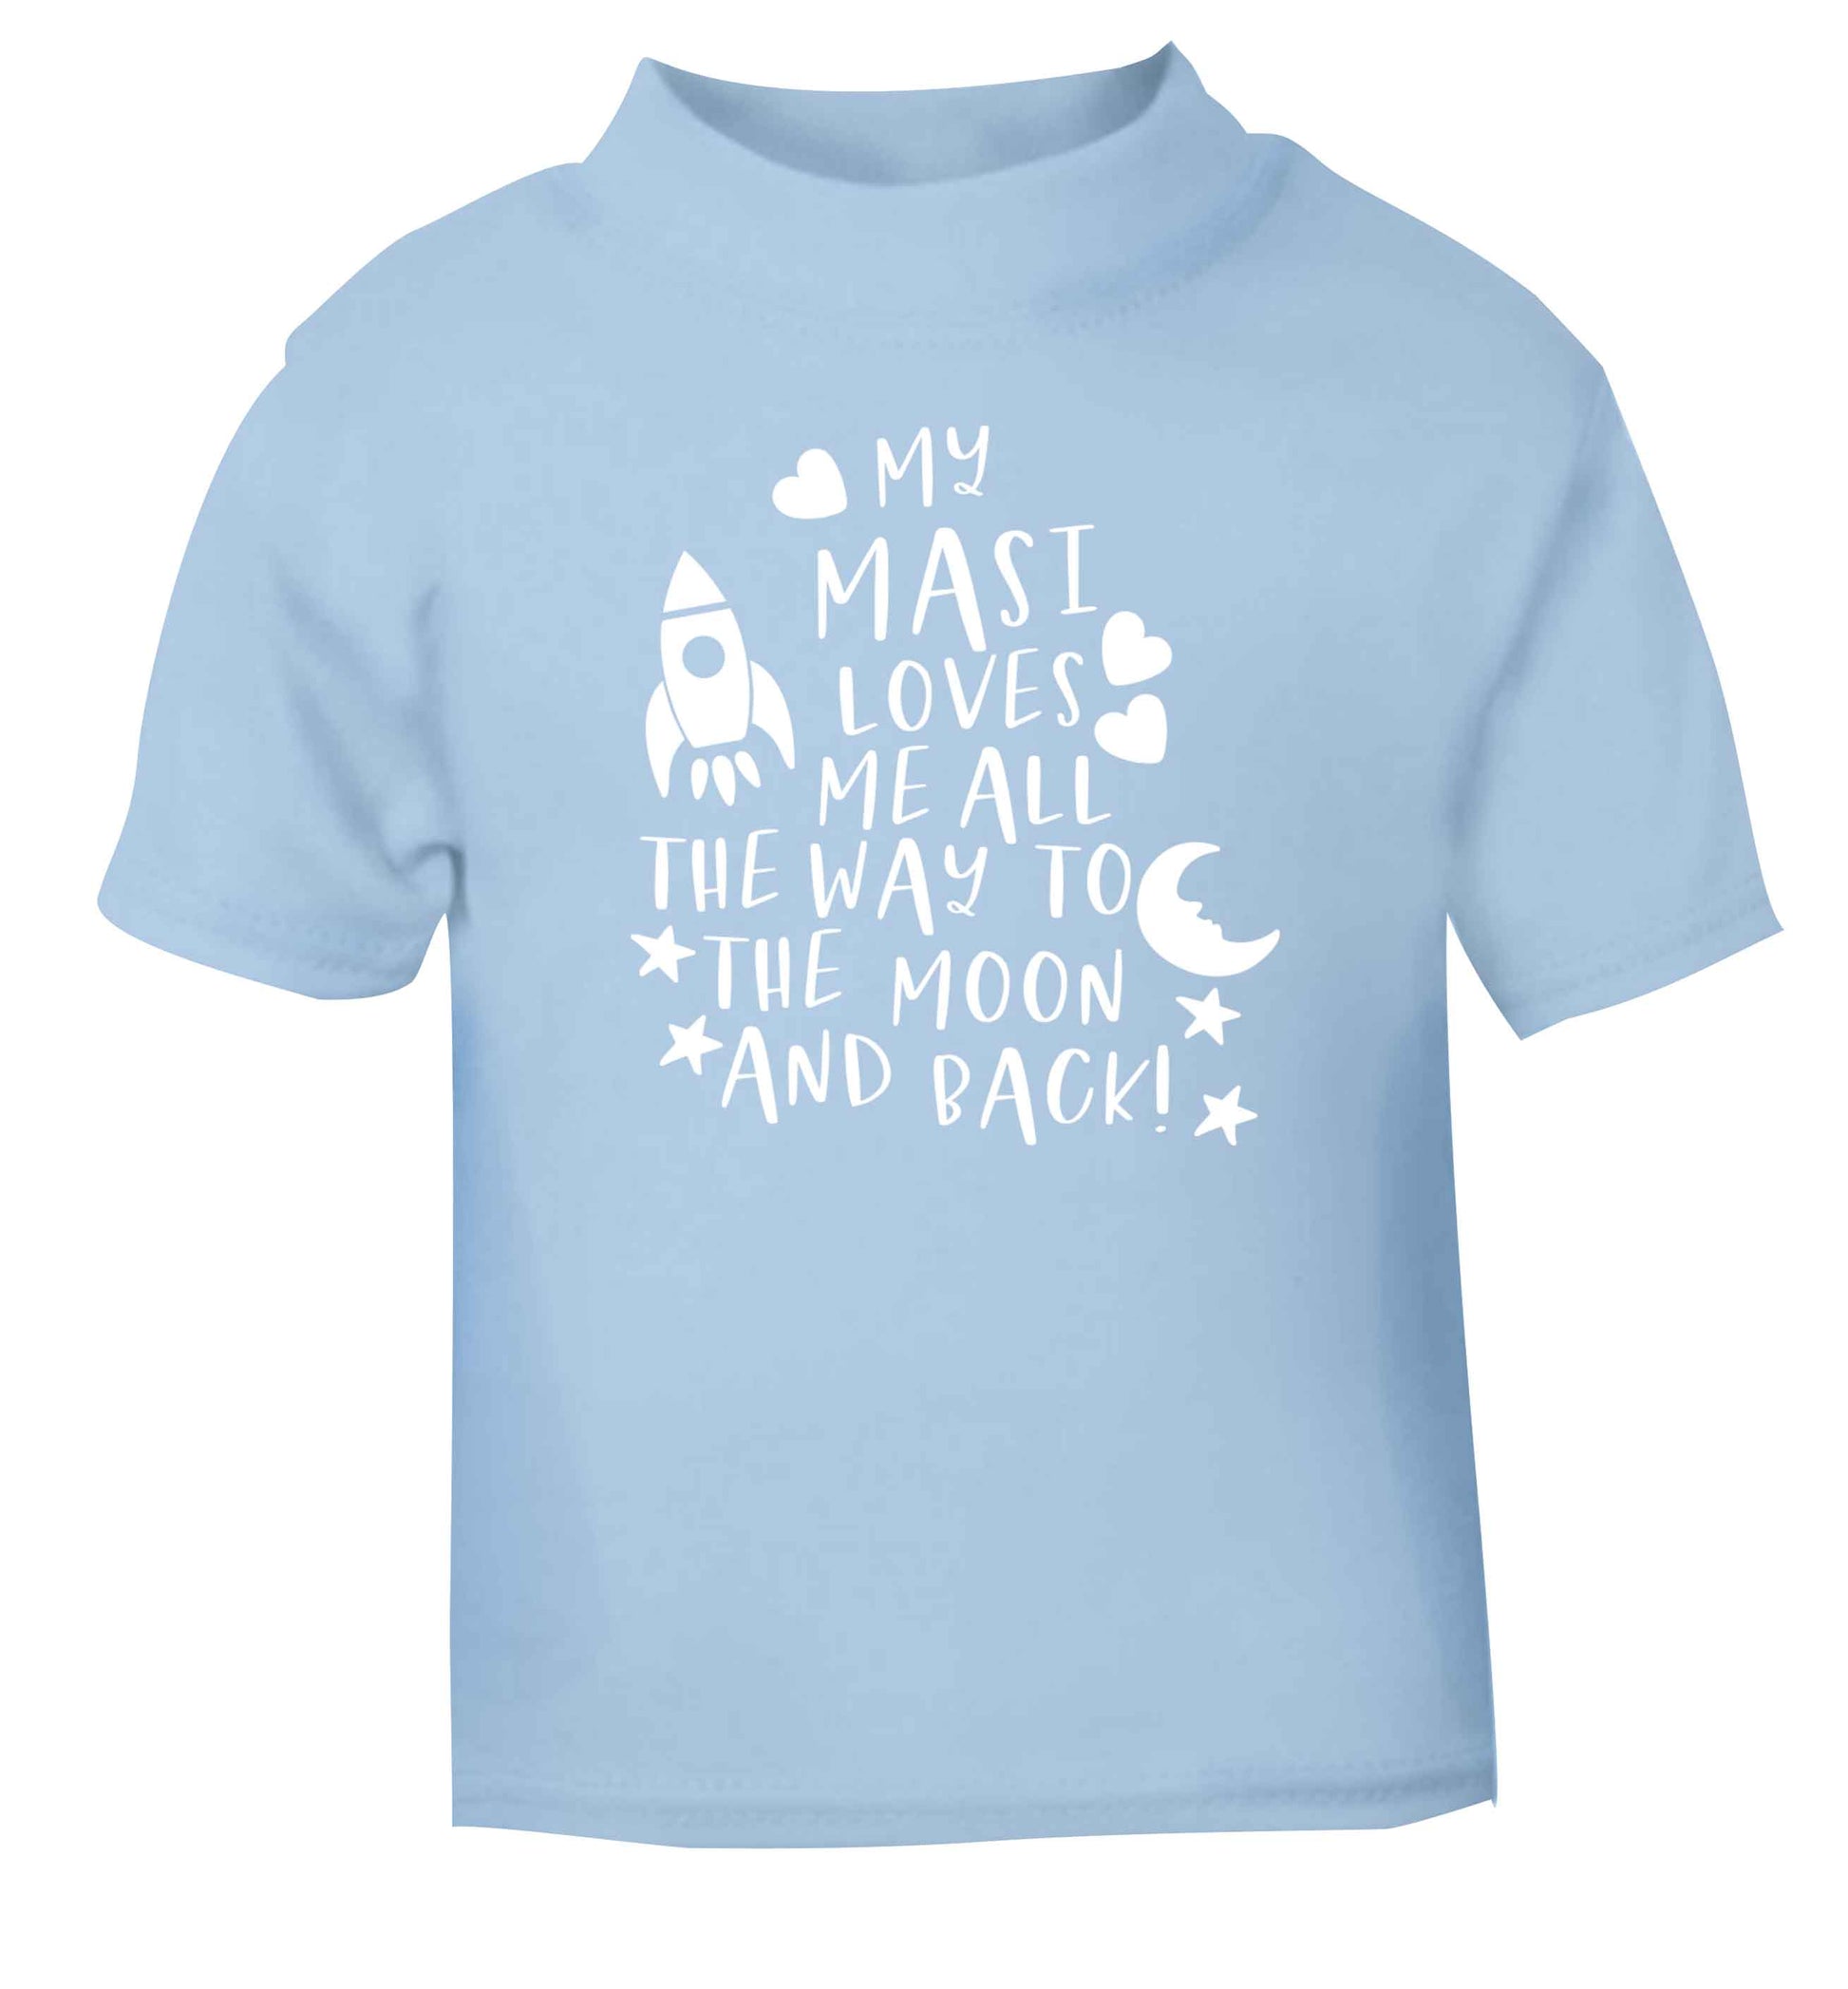 My masi loves me all the way to the moon and back light blue Baby Toddler Tshirt 2 Years